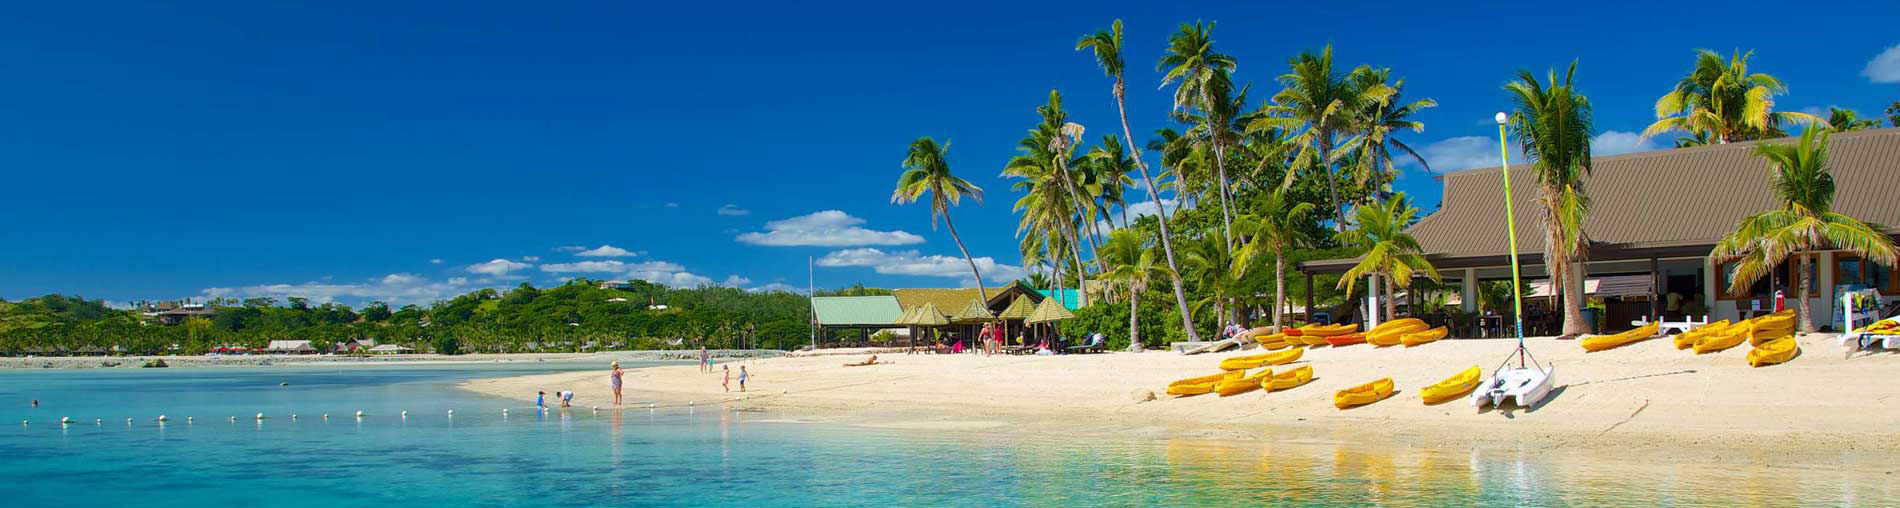 Affordable Holiday Tour Packages to Fiji Island